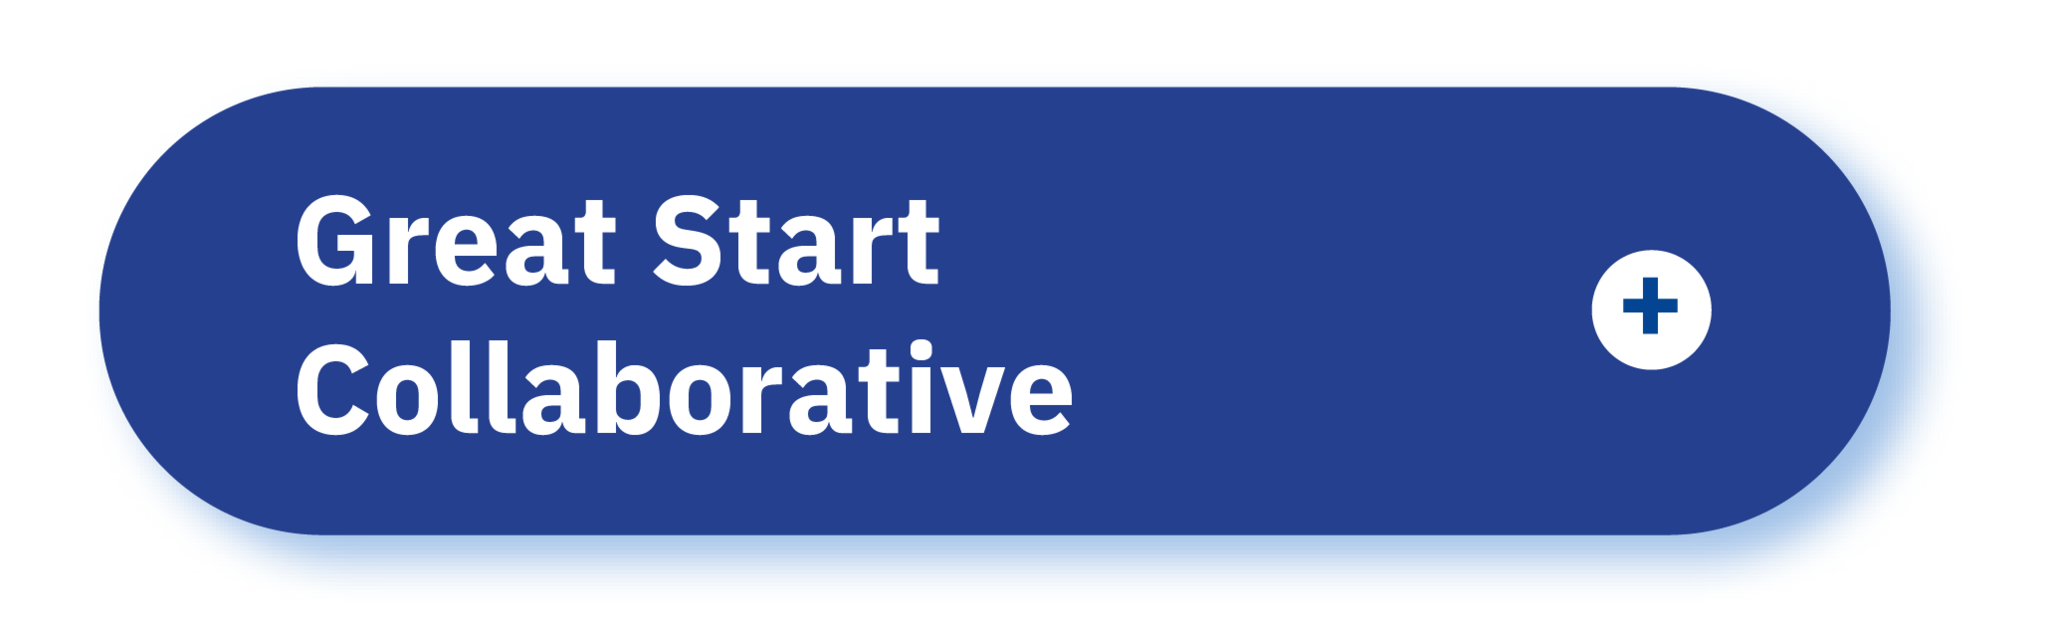 Click here for Great Start Collaborative information